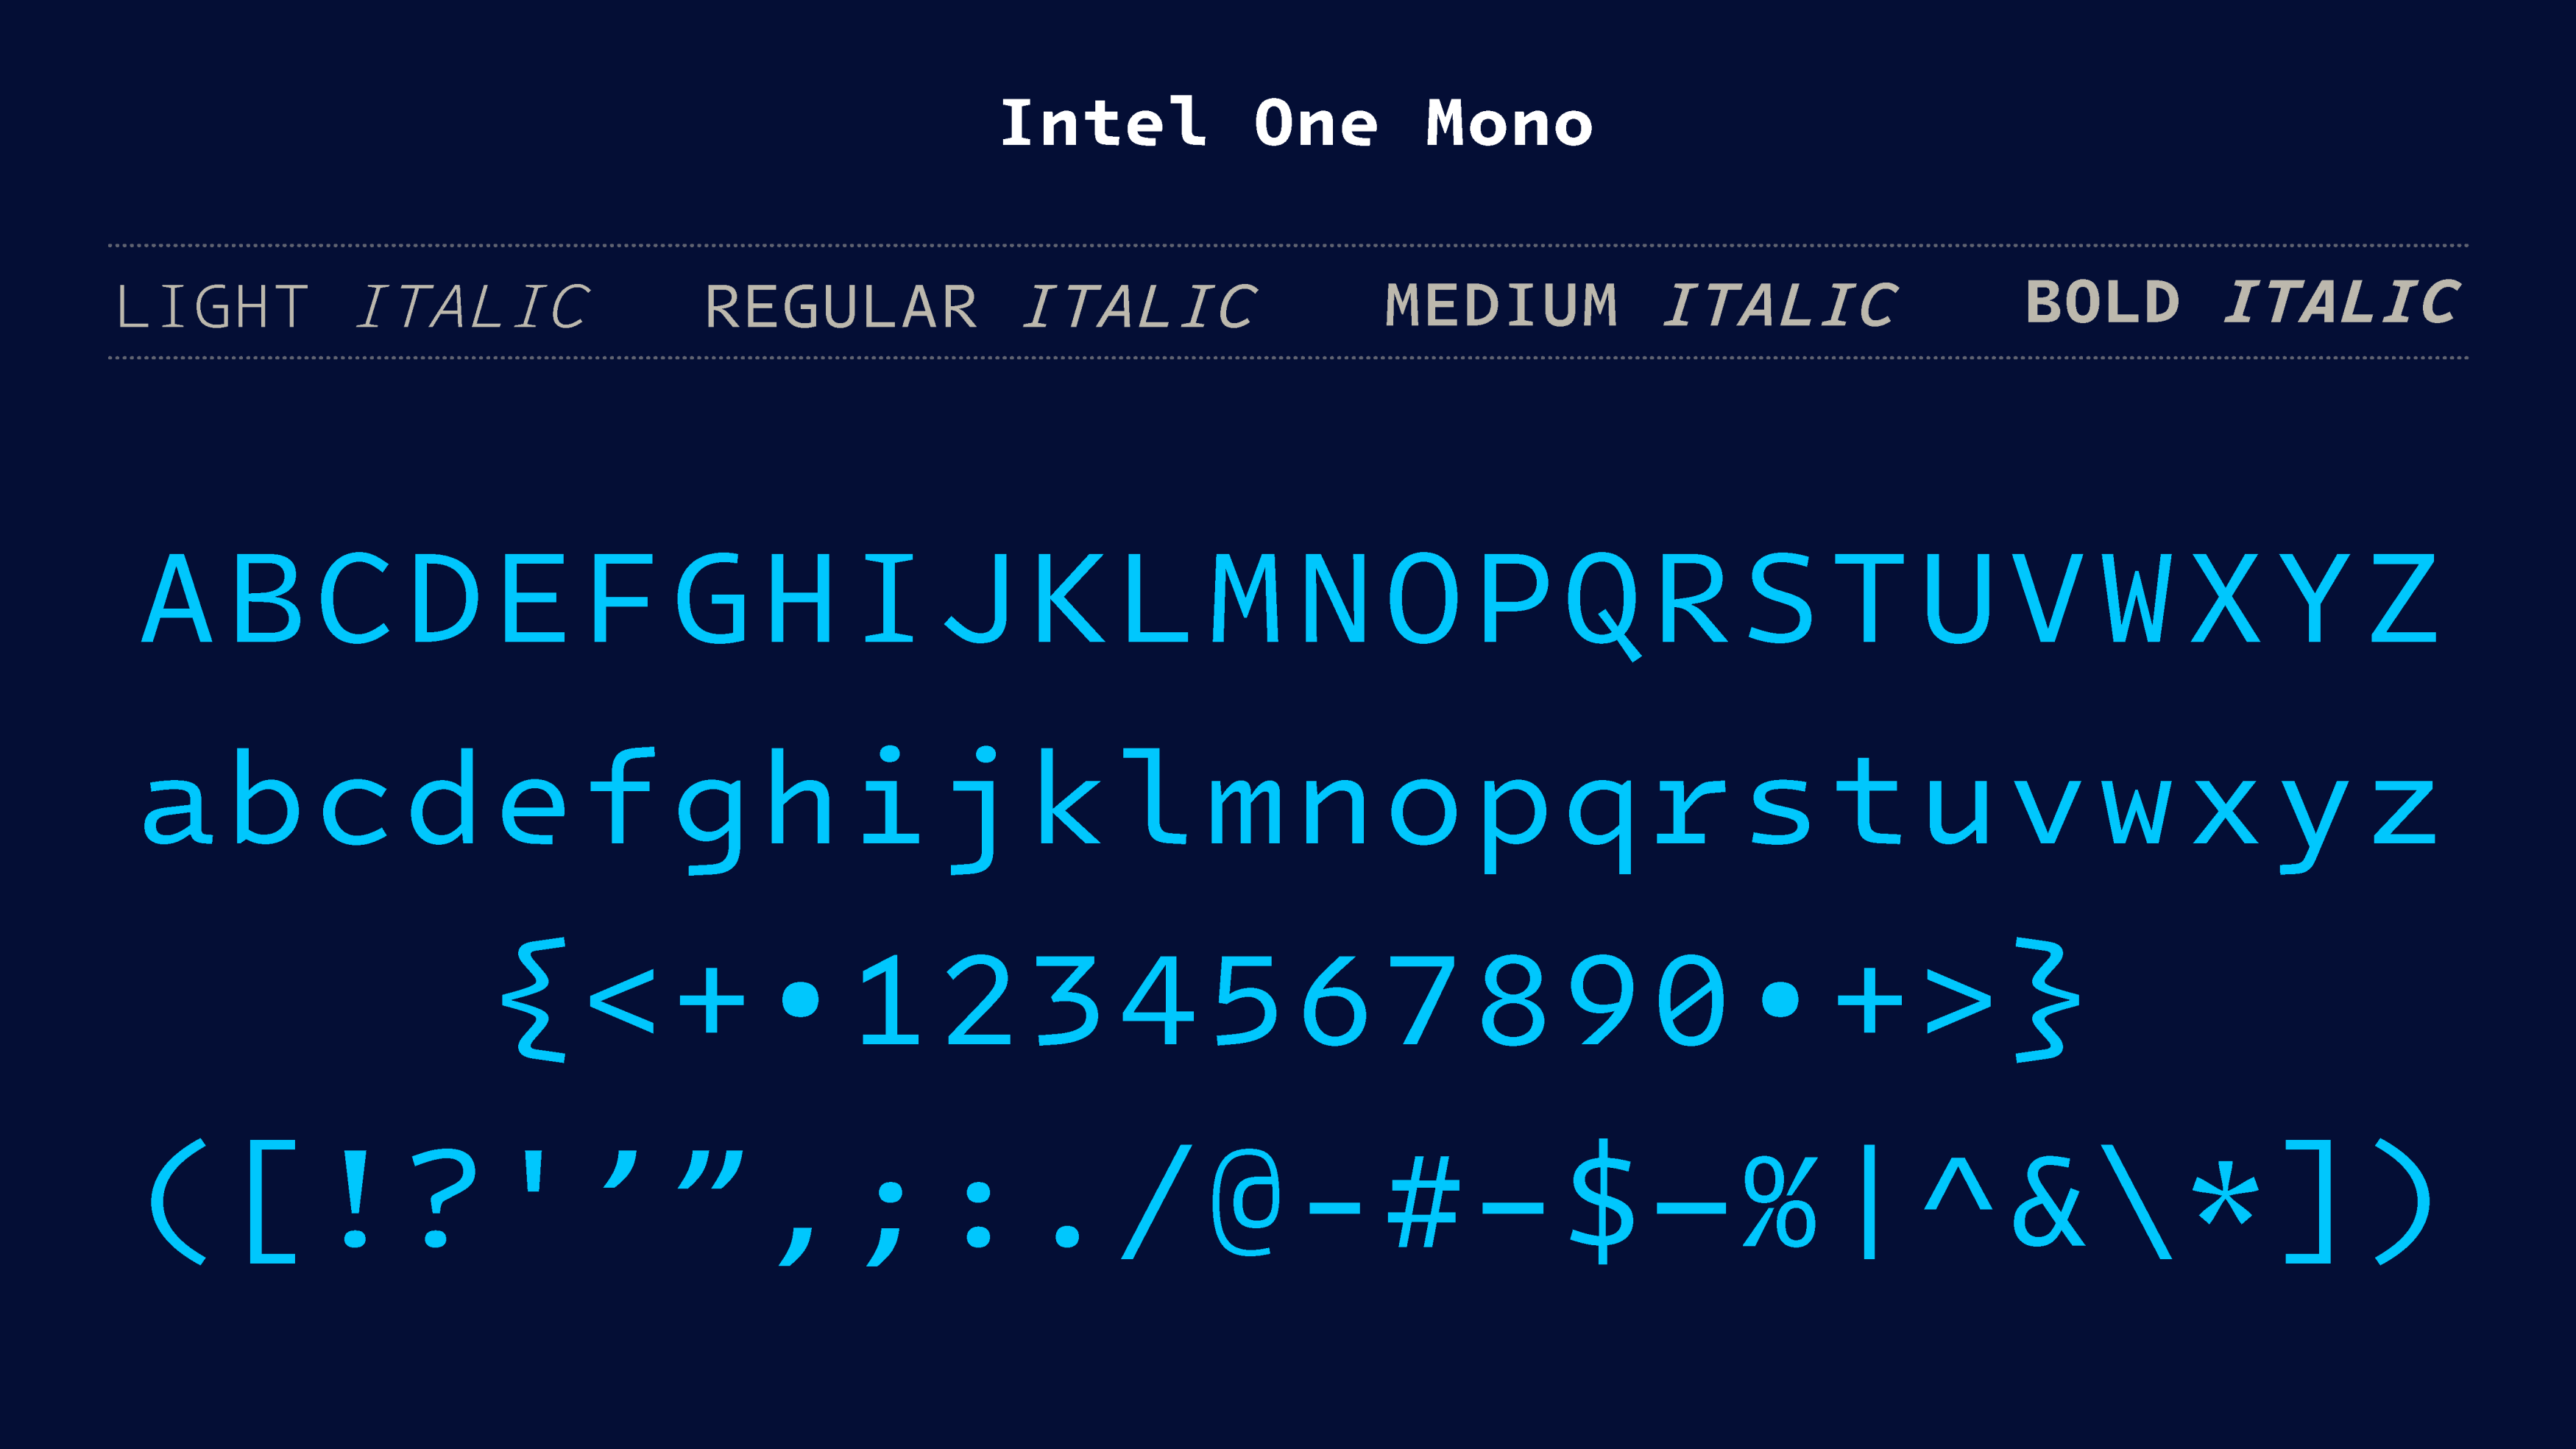 Intel One Mono is a new open-source typeface for visually impaired developers